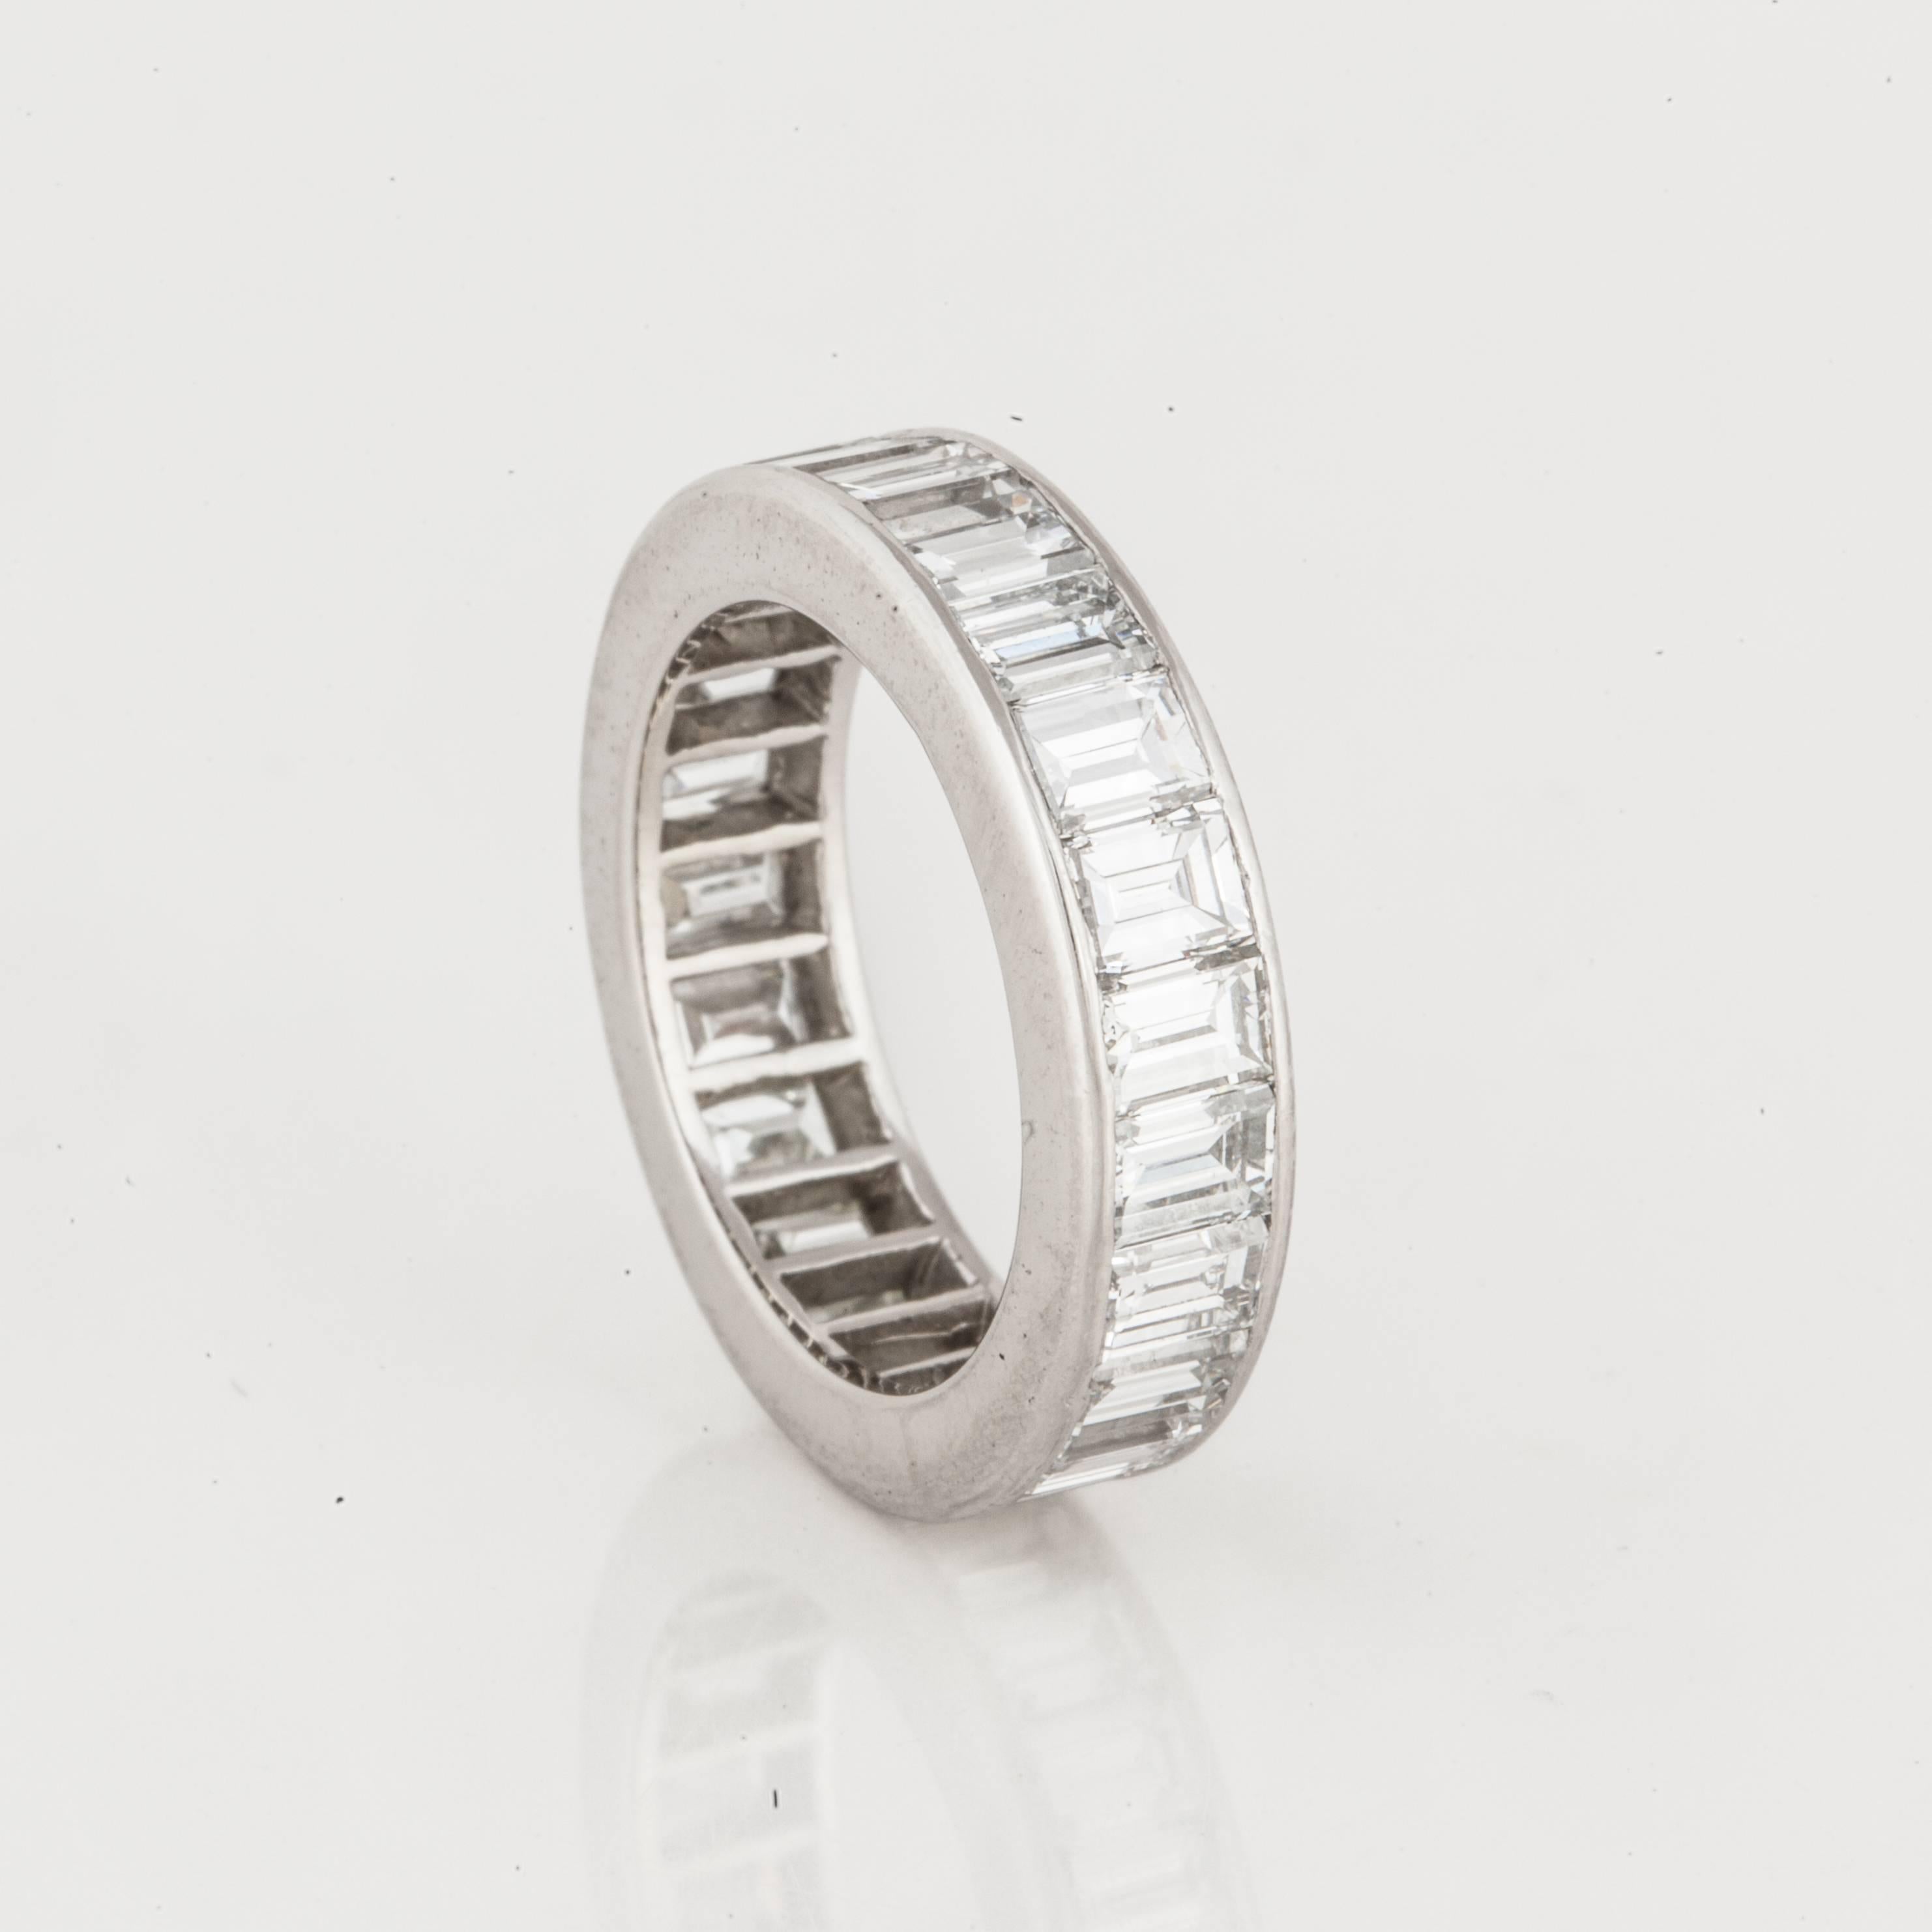 Platinum eternity band featuring emerald-cut diamonds.  There are 23 emerald-cut diamonds totaling 4.60 carats, G-H color and VVS2-VS1 clarity.  Ring is a size 6. It measures 5 mm wide and is 3 mm thick. 